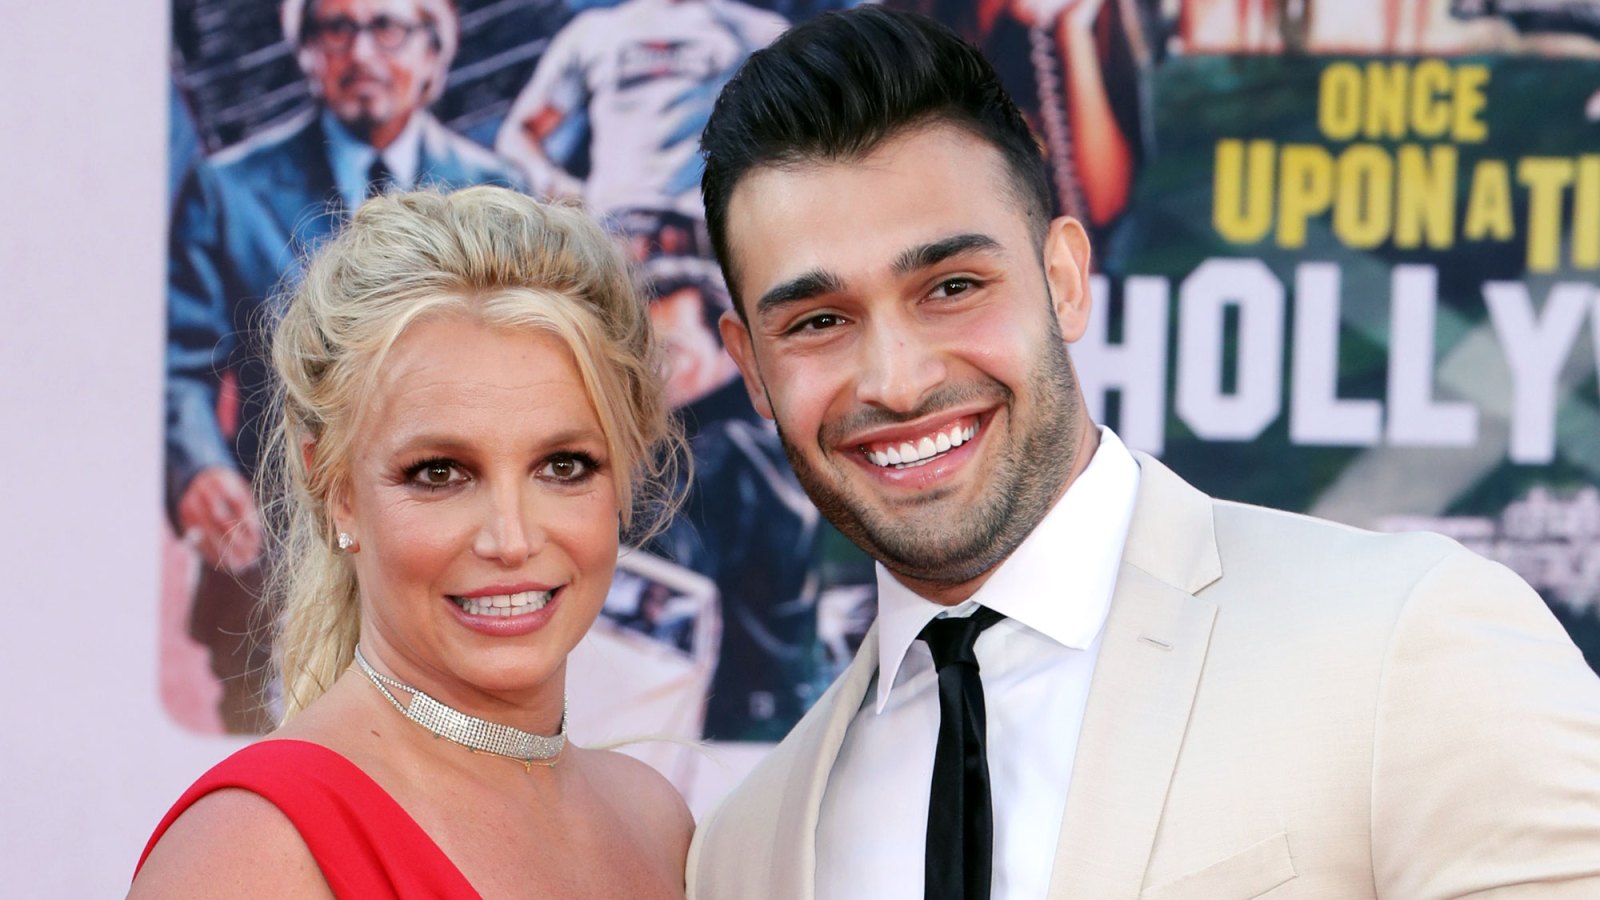 Britney Spears Gets Support From Boyfriend Sam Asghari After Posting About Not Knowing ‘Who to Trust’